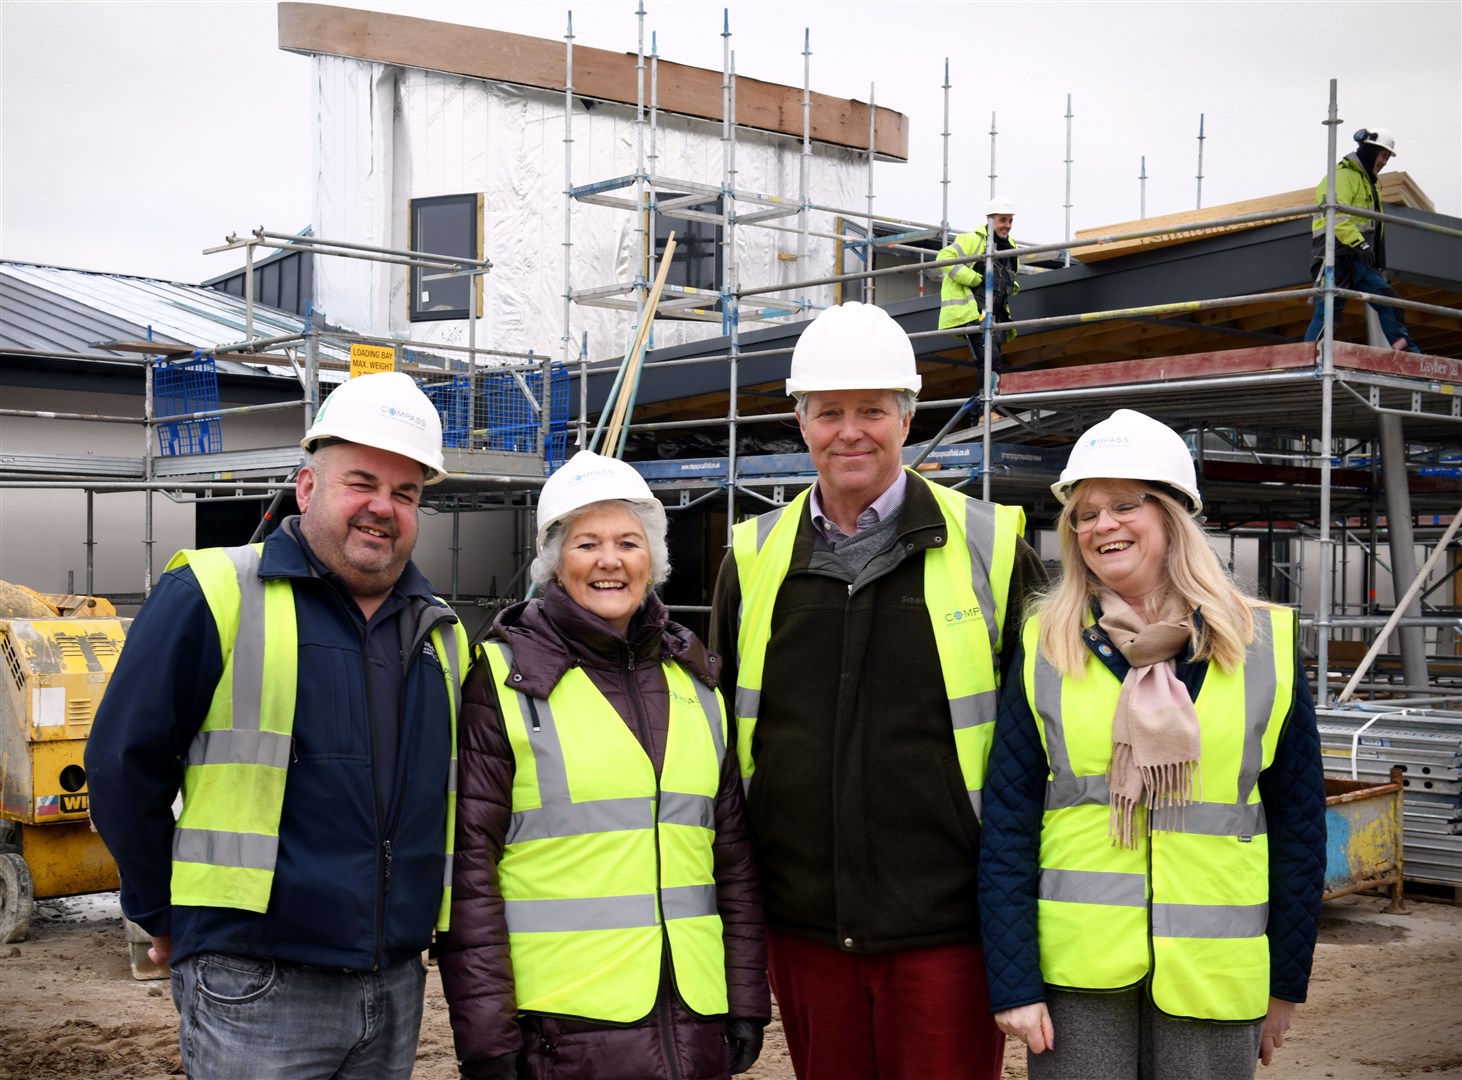 Site manager Greg Cooper, Elsie Normington, Edward Mountain and Rona Matheson take a tour of the Haven Centre site.